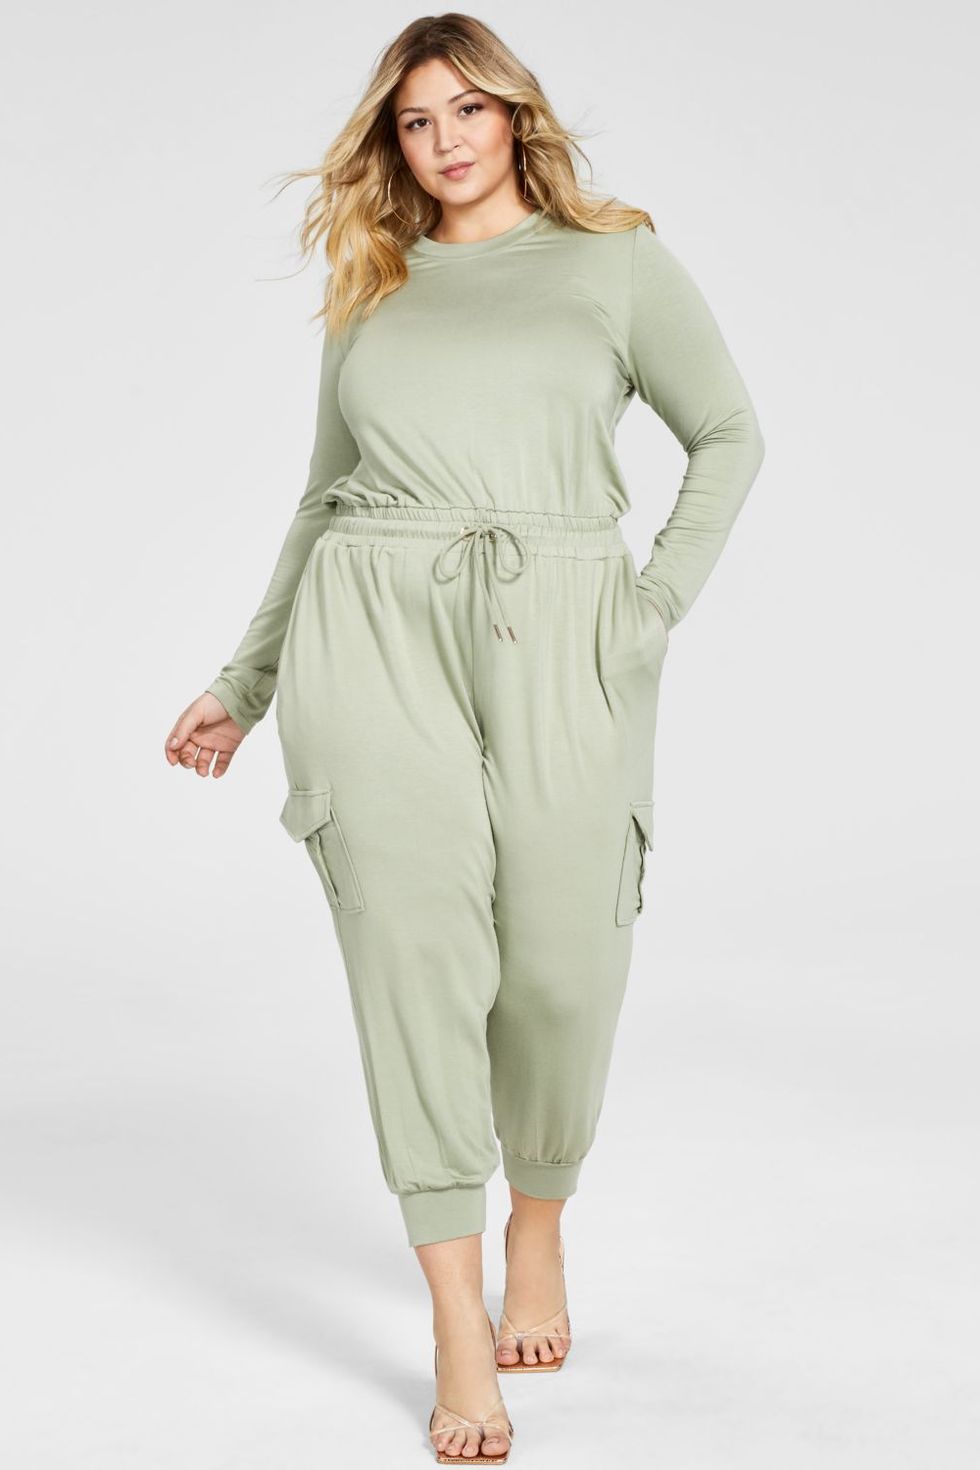 30 Cute Jumpsuits For A One-And-Done Look